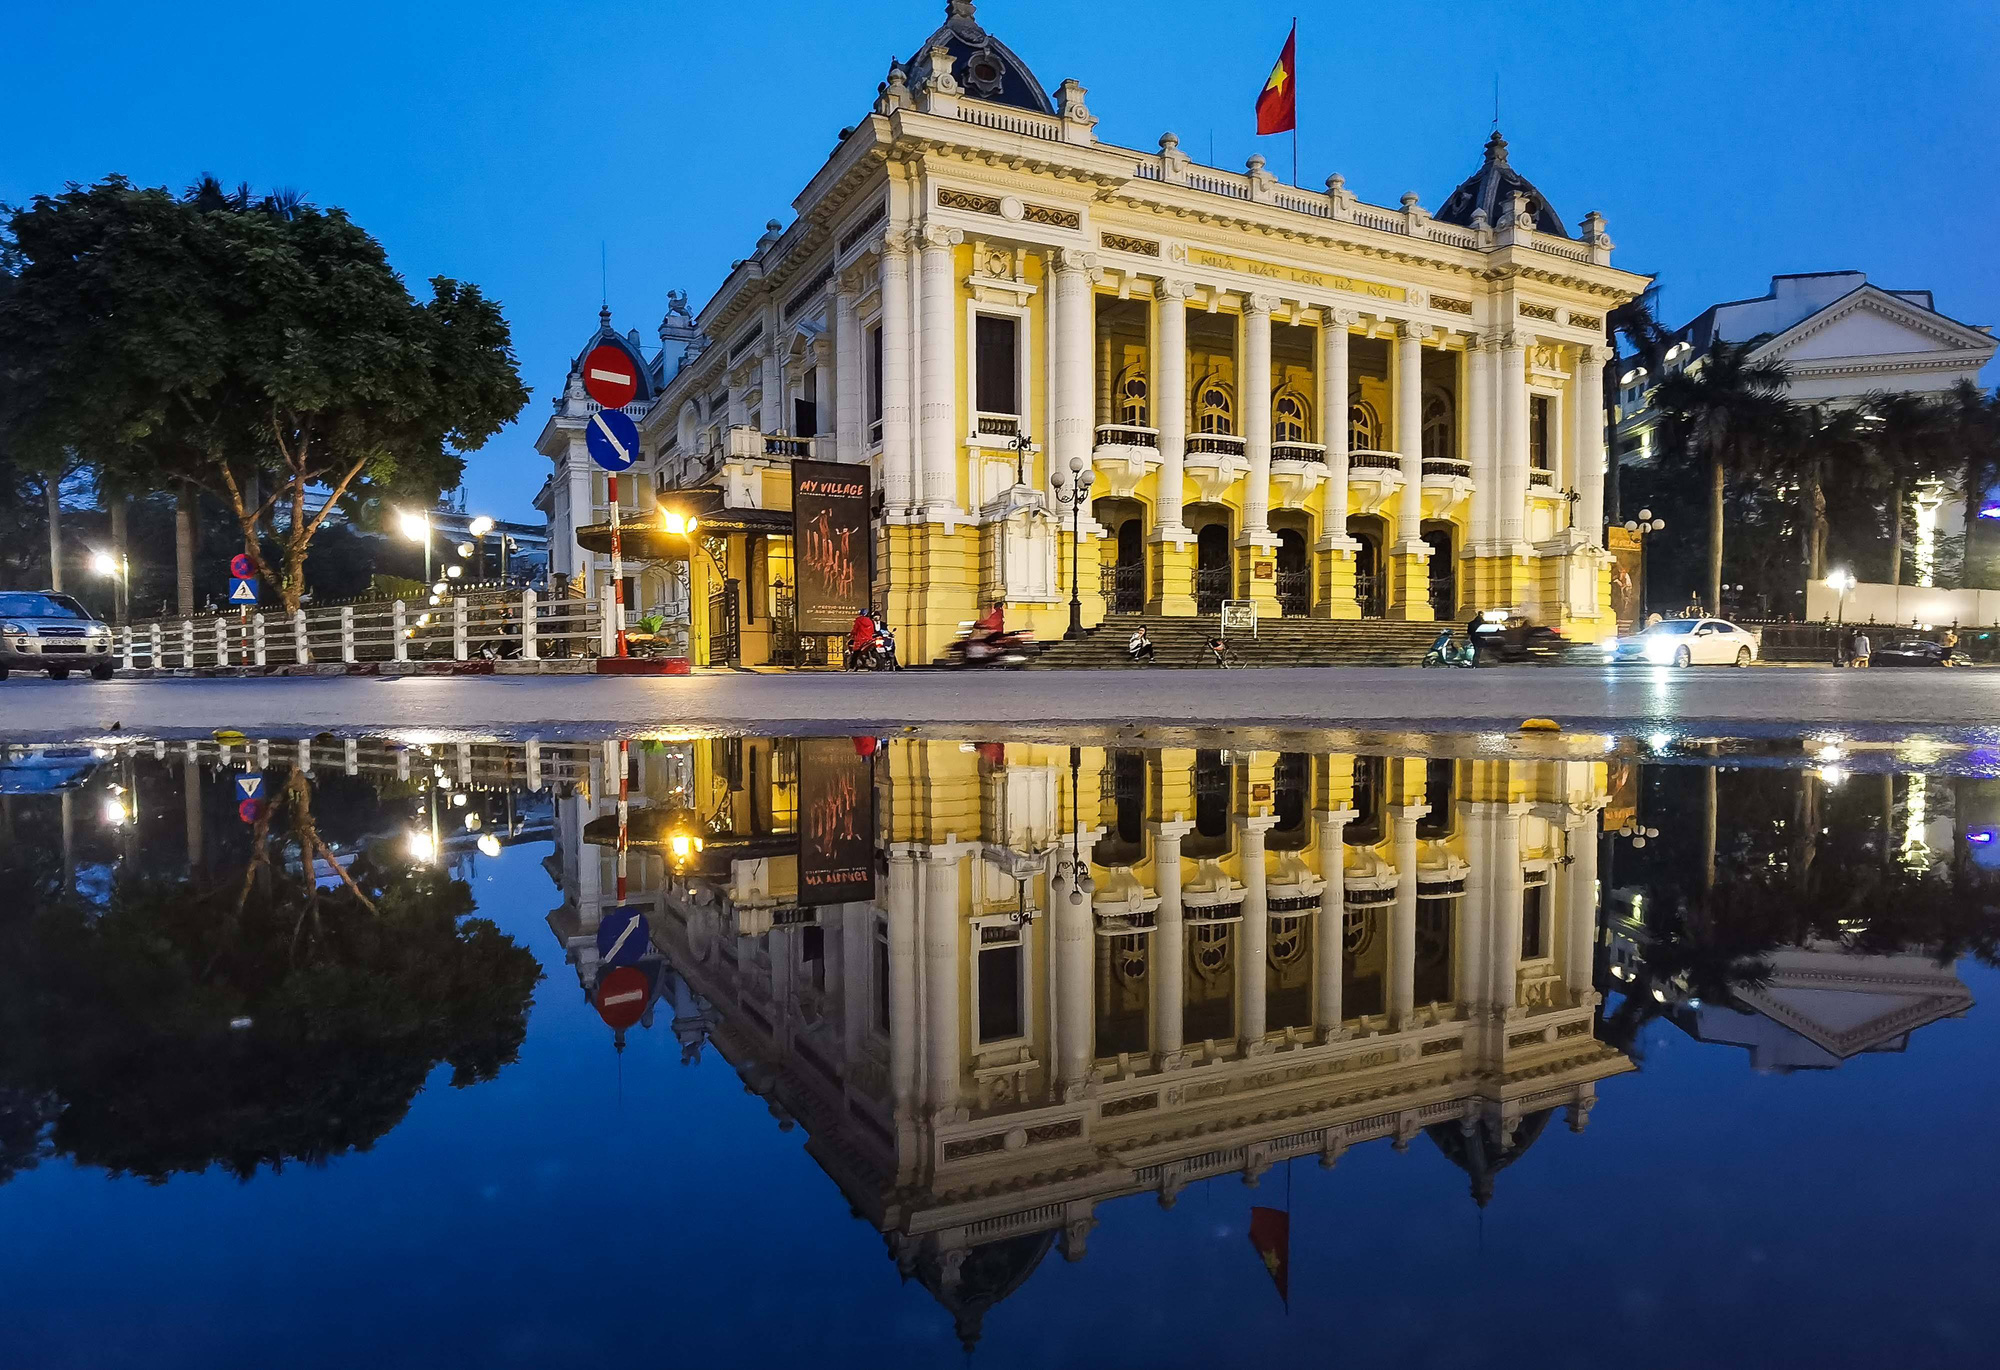 The Hanoi Opera House in Hanoi is pictured during a COVID-19 social distancing period in Vietnam in April 2020. Photo: Nguyen Khanh / Tuoi Tre